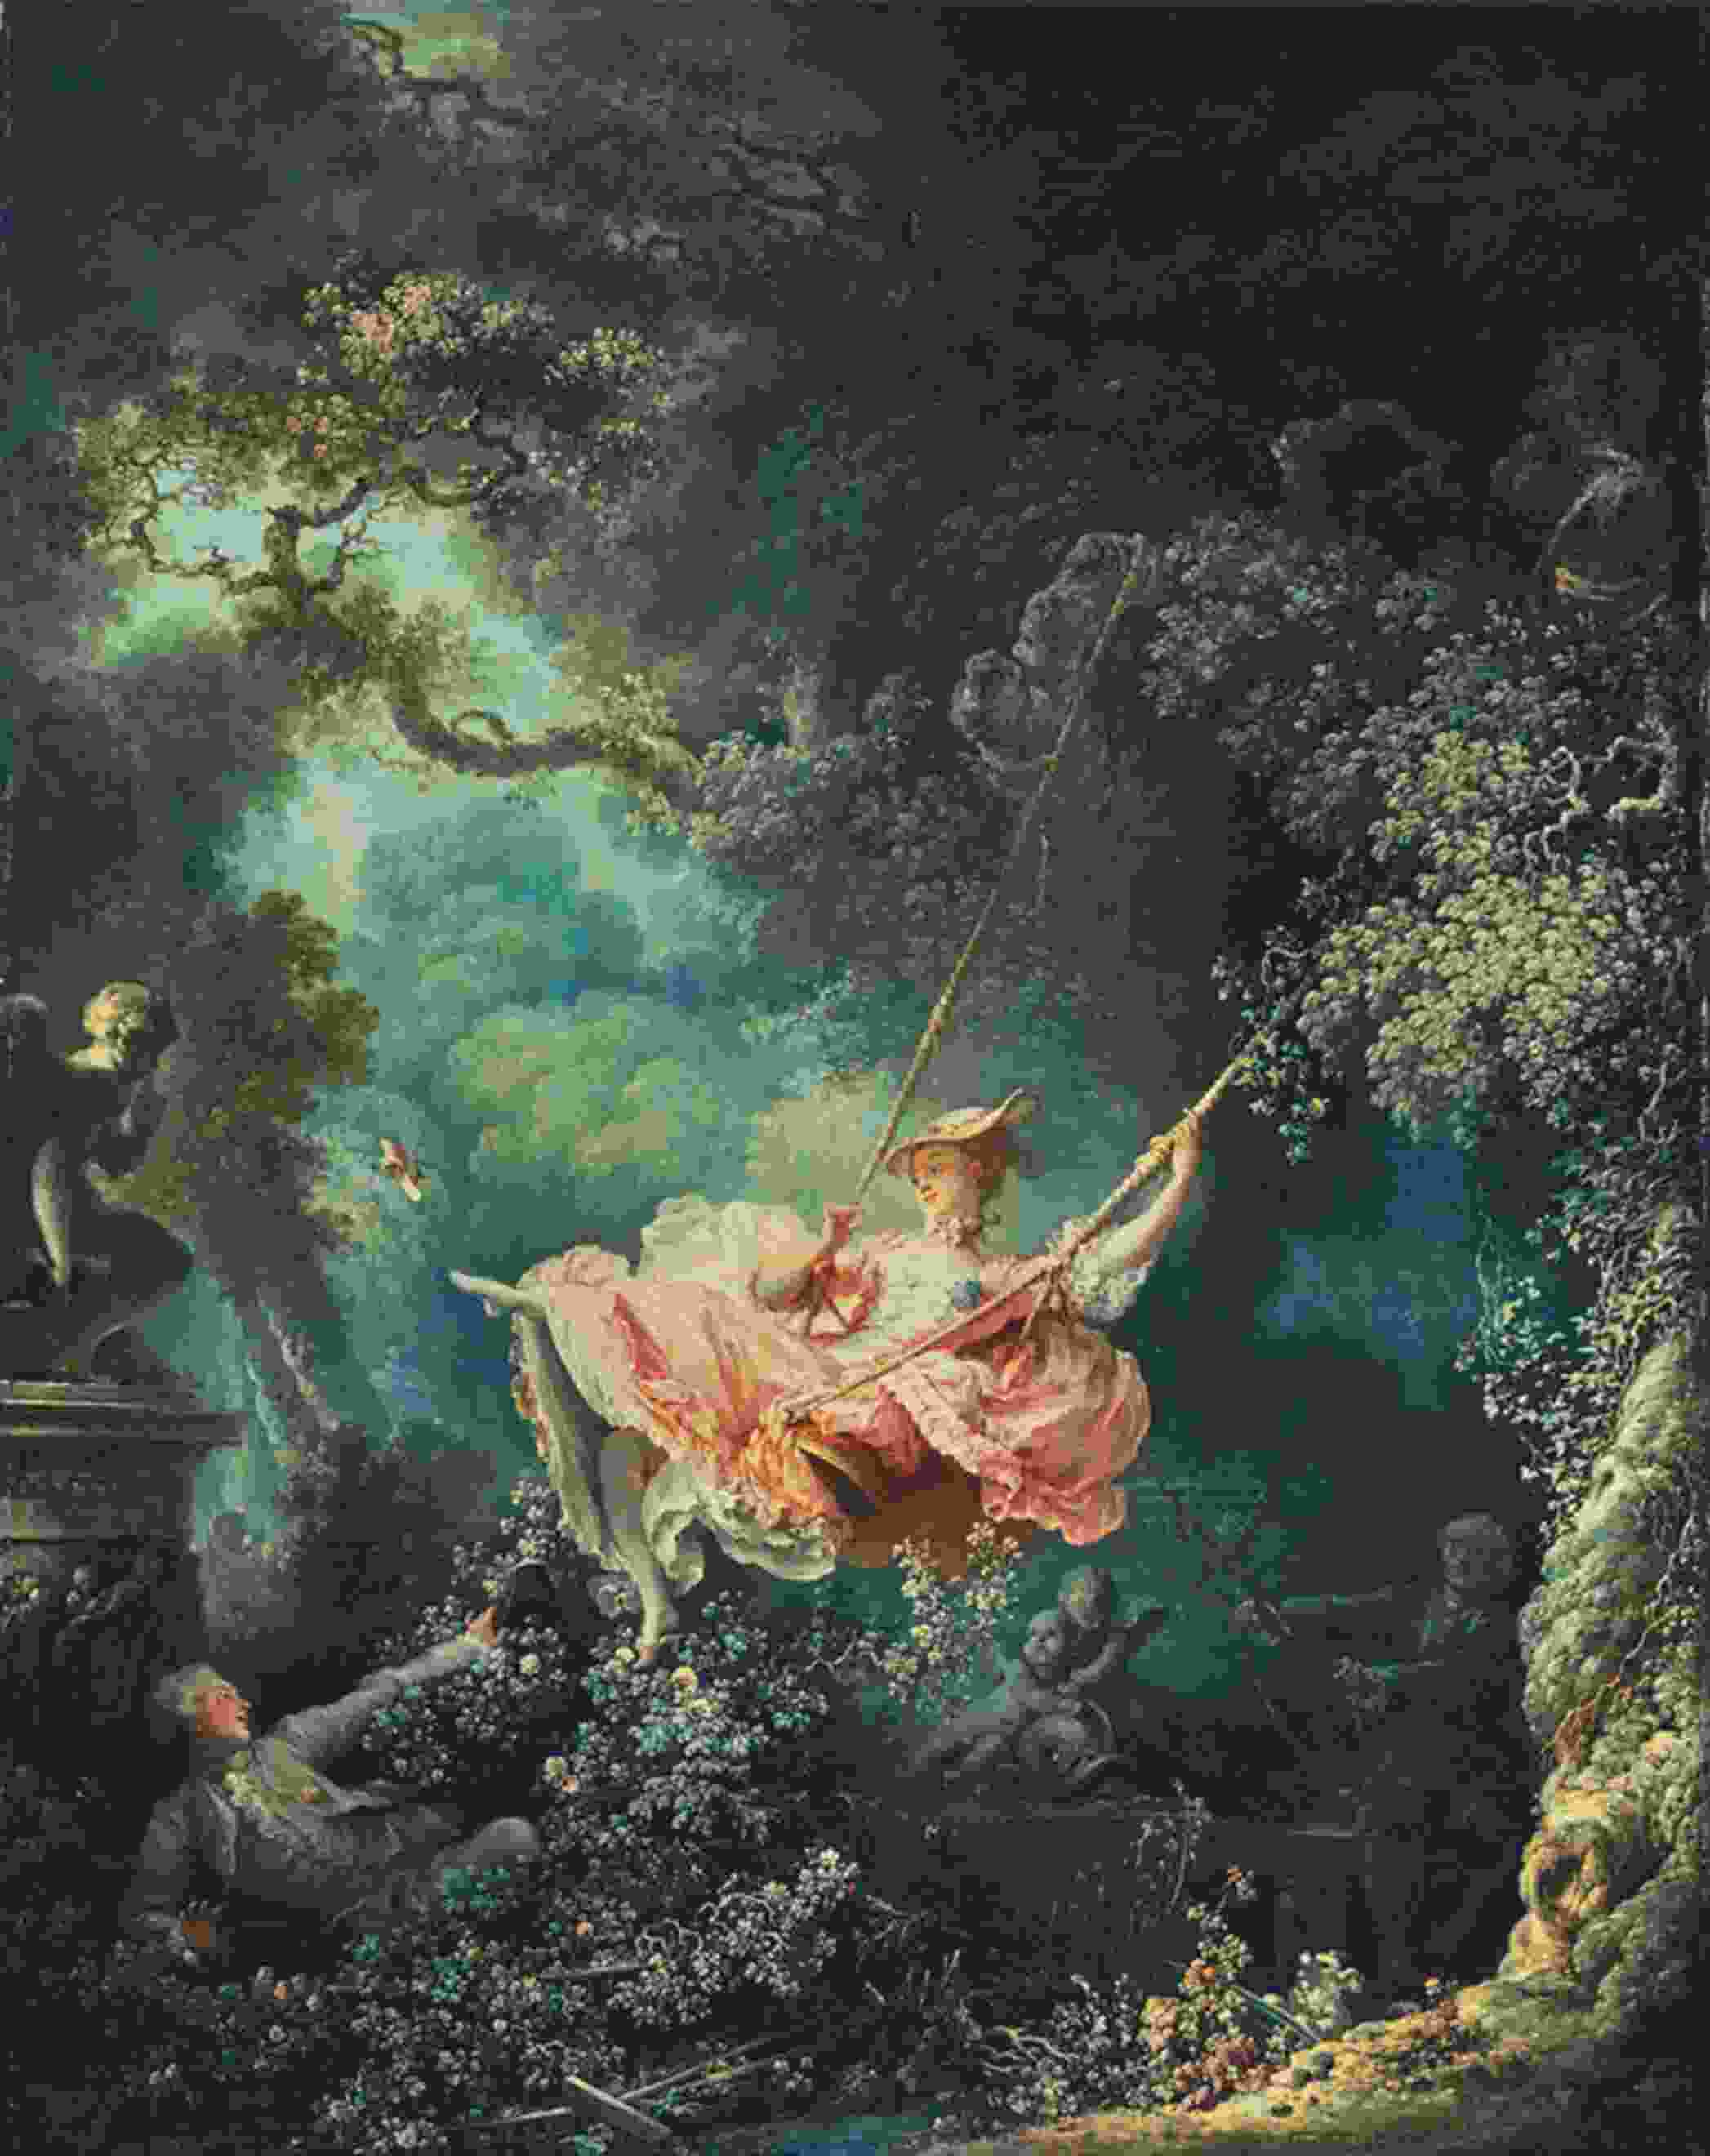 Jean-Honore Fragonard’s Happy Accidents of the Swing of 1767